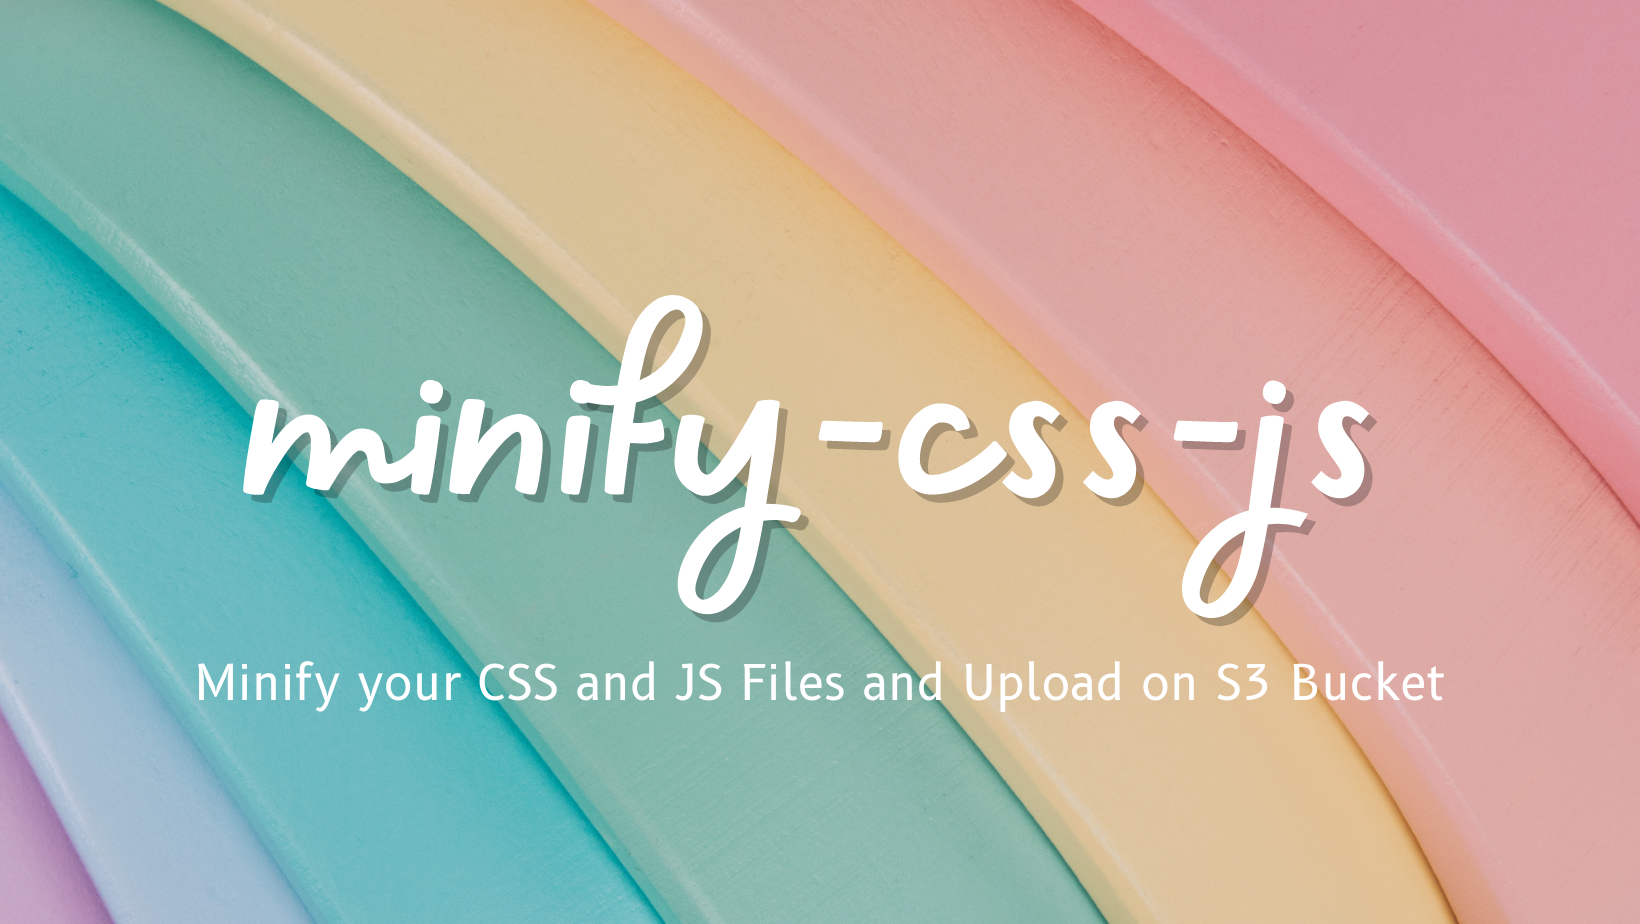 MINIFY CSS AND JS FILES